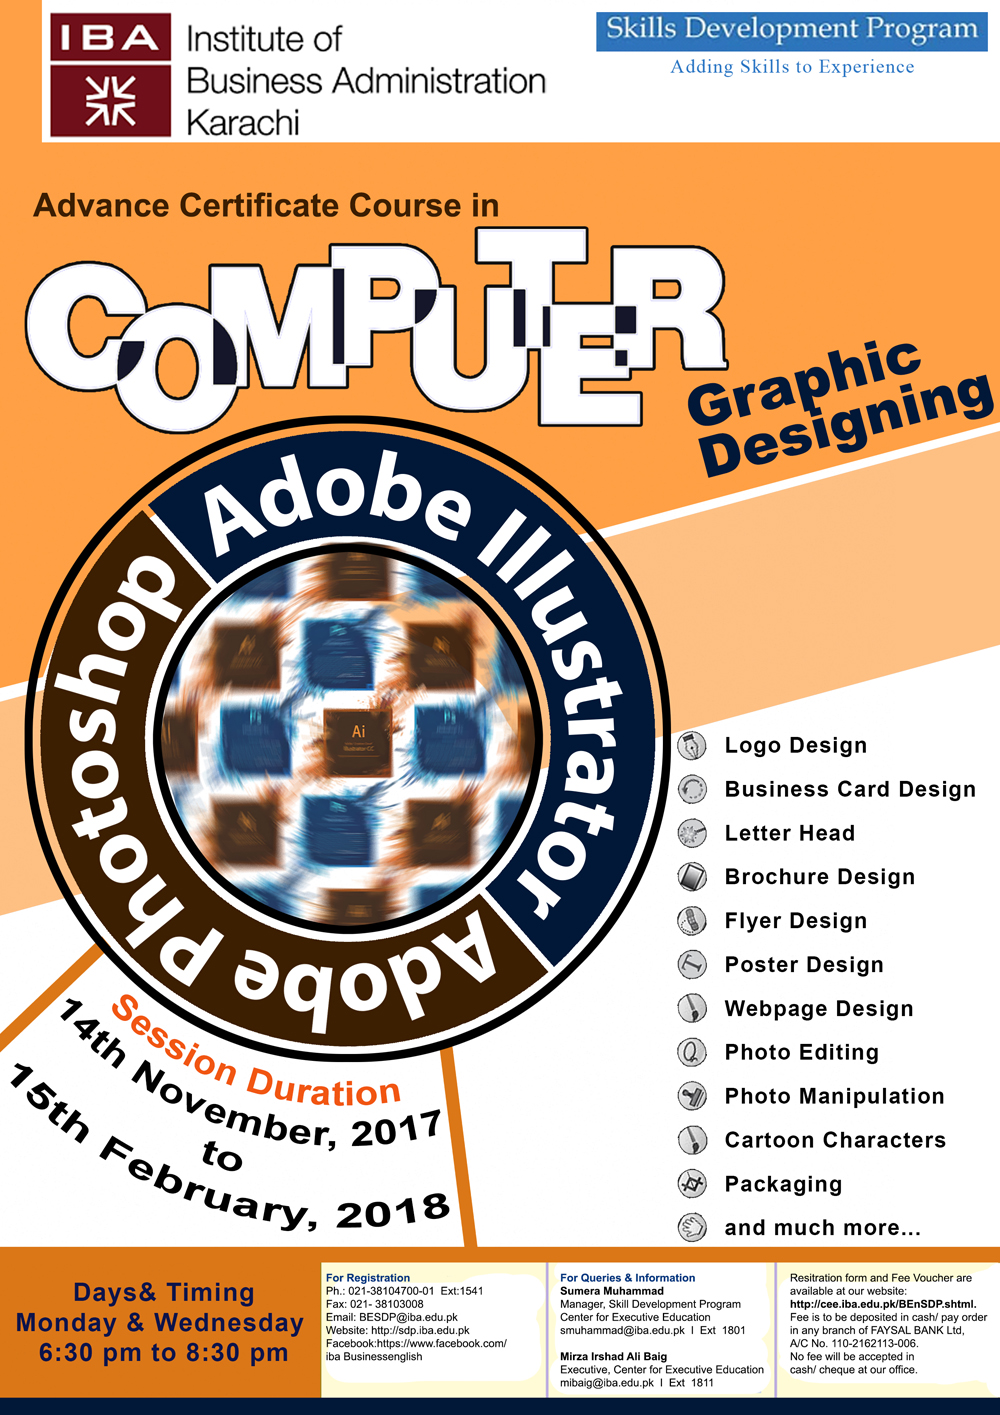 Advance Certificate Course in Computer Graphic Designing